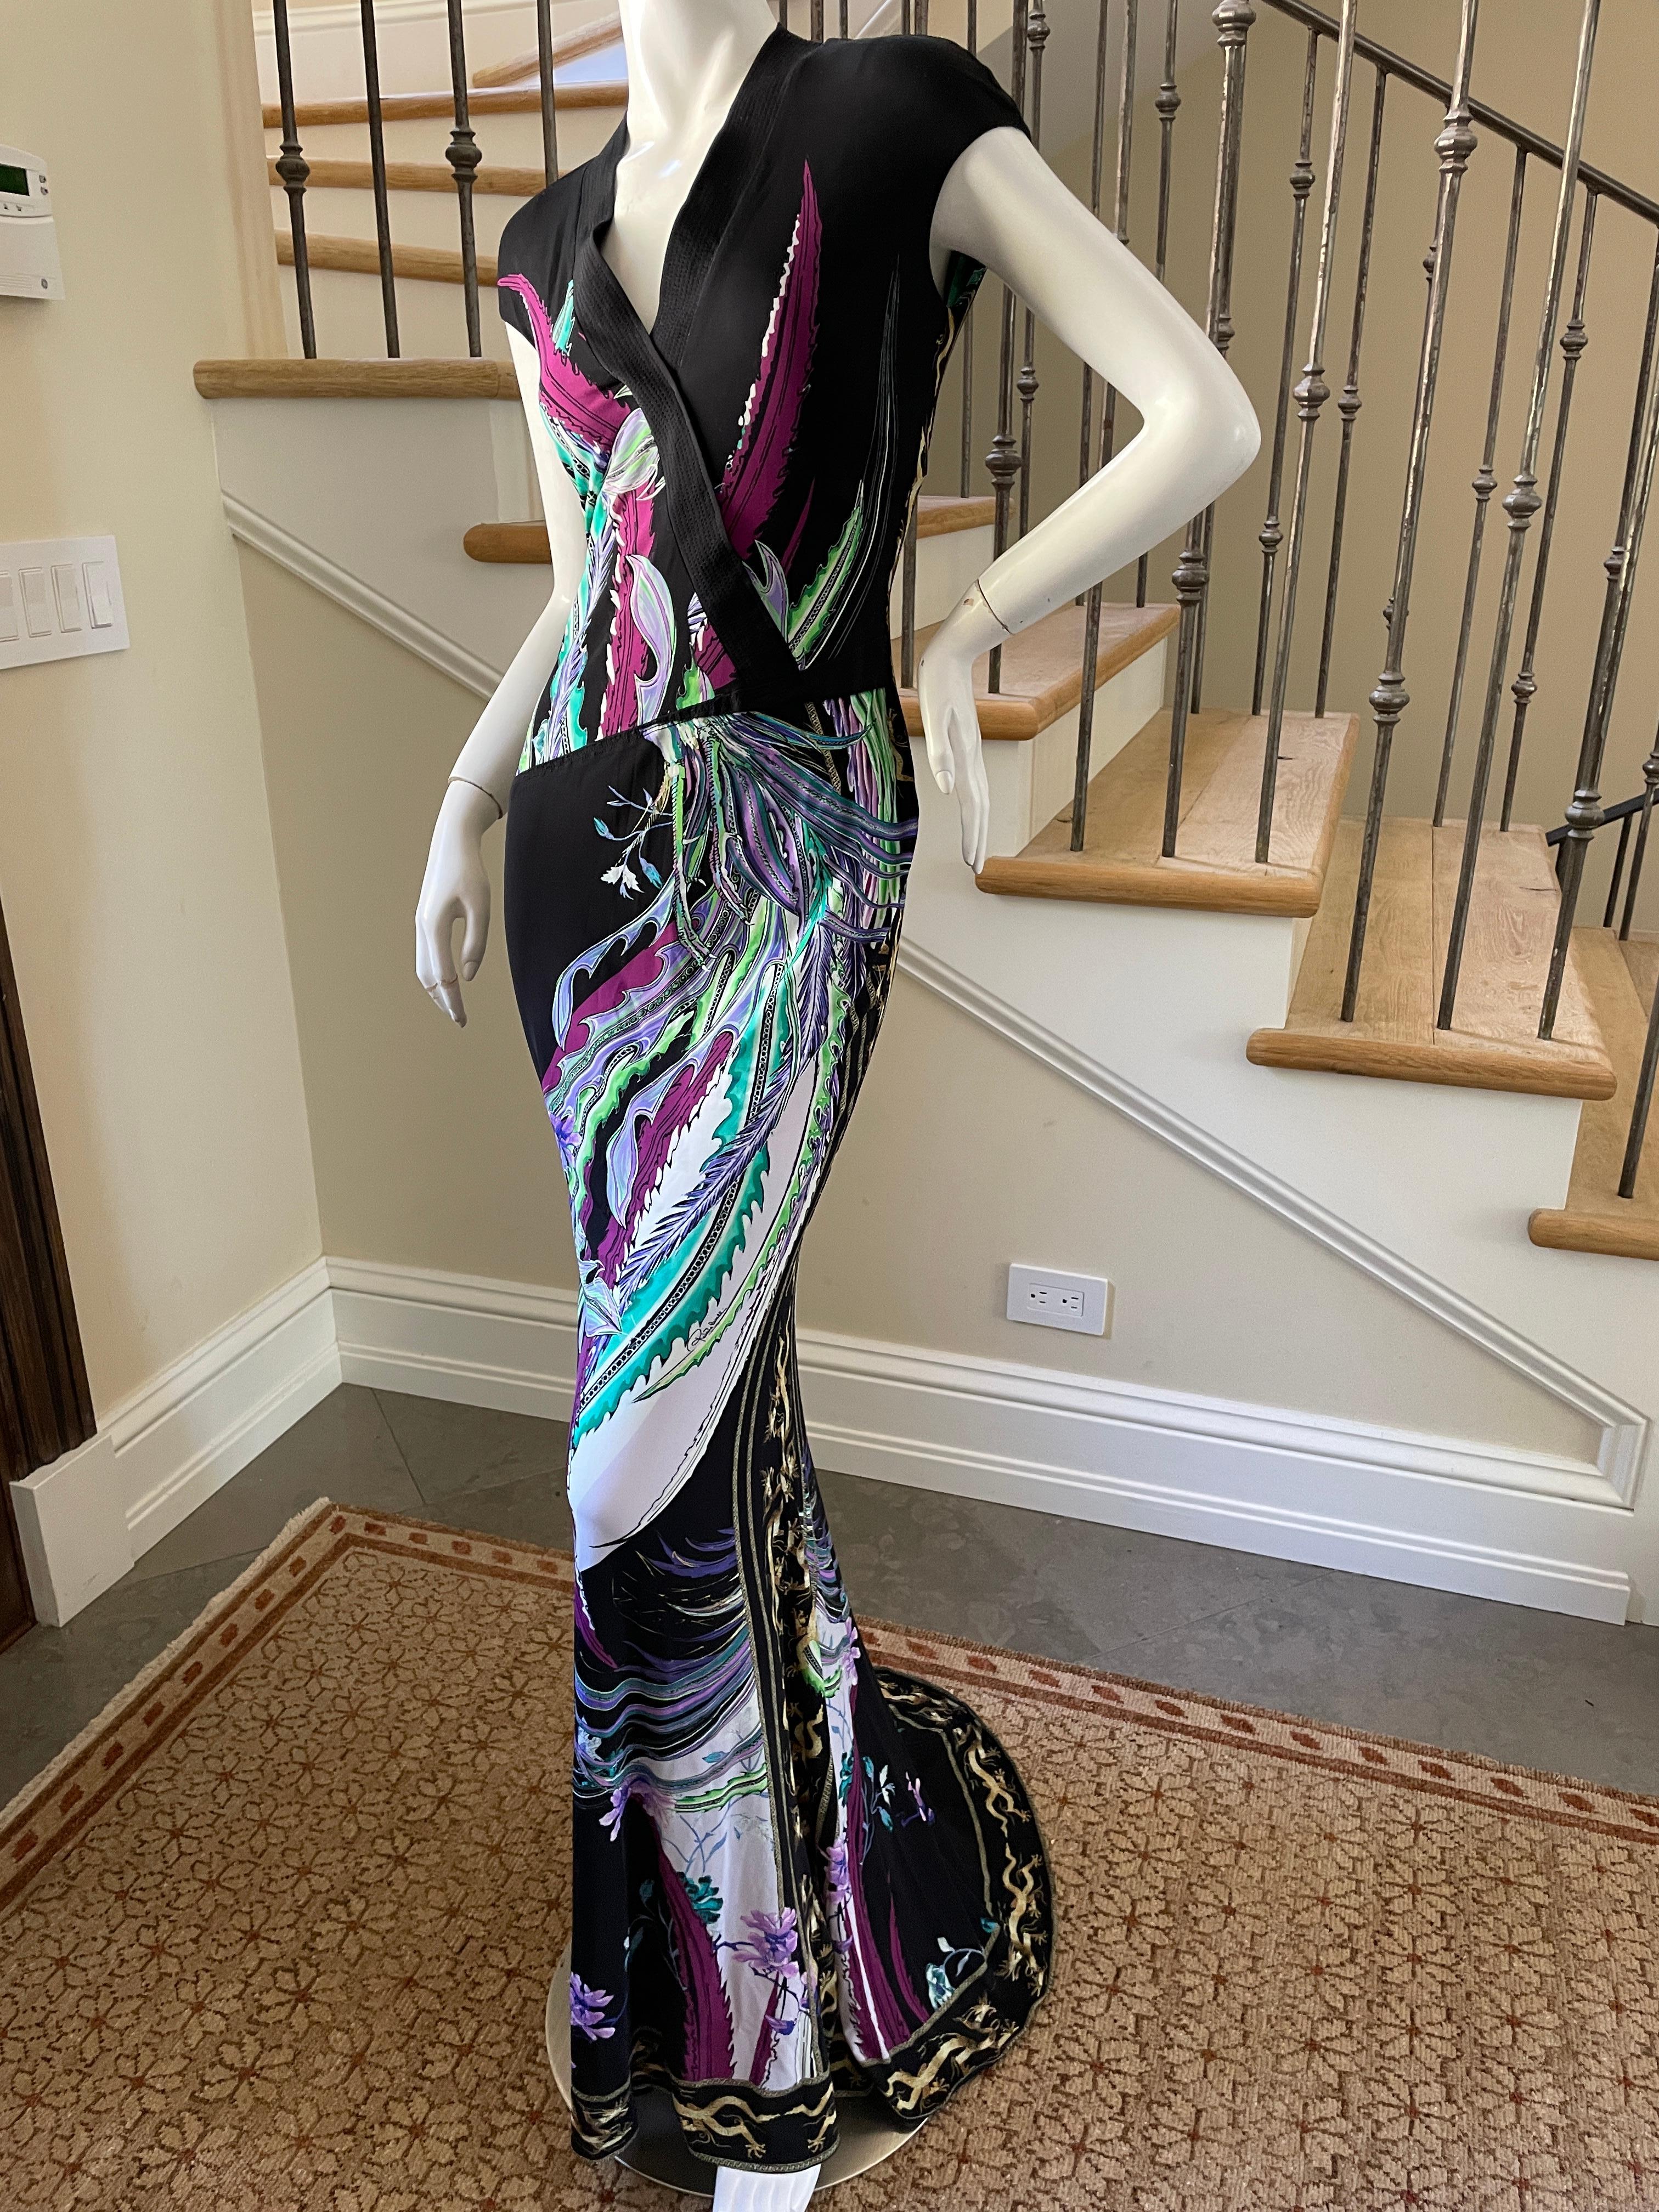 Roberto Cavalli VIntage Long Bird Print Evening Dress In Excellent Condition For Sale In Cloverdale, CA